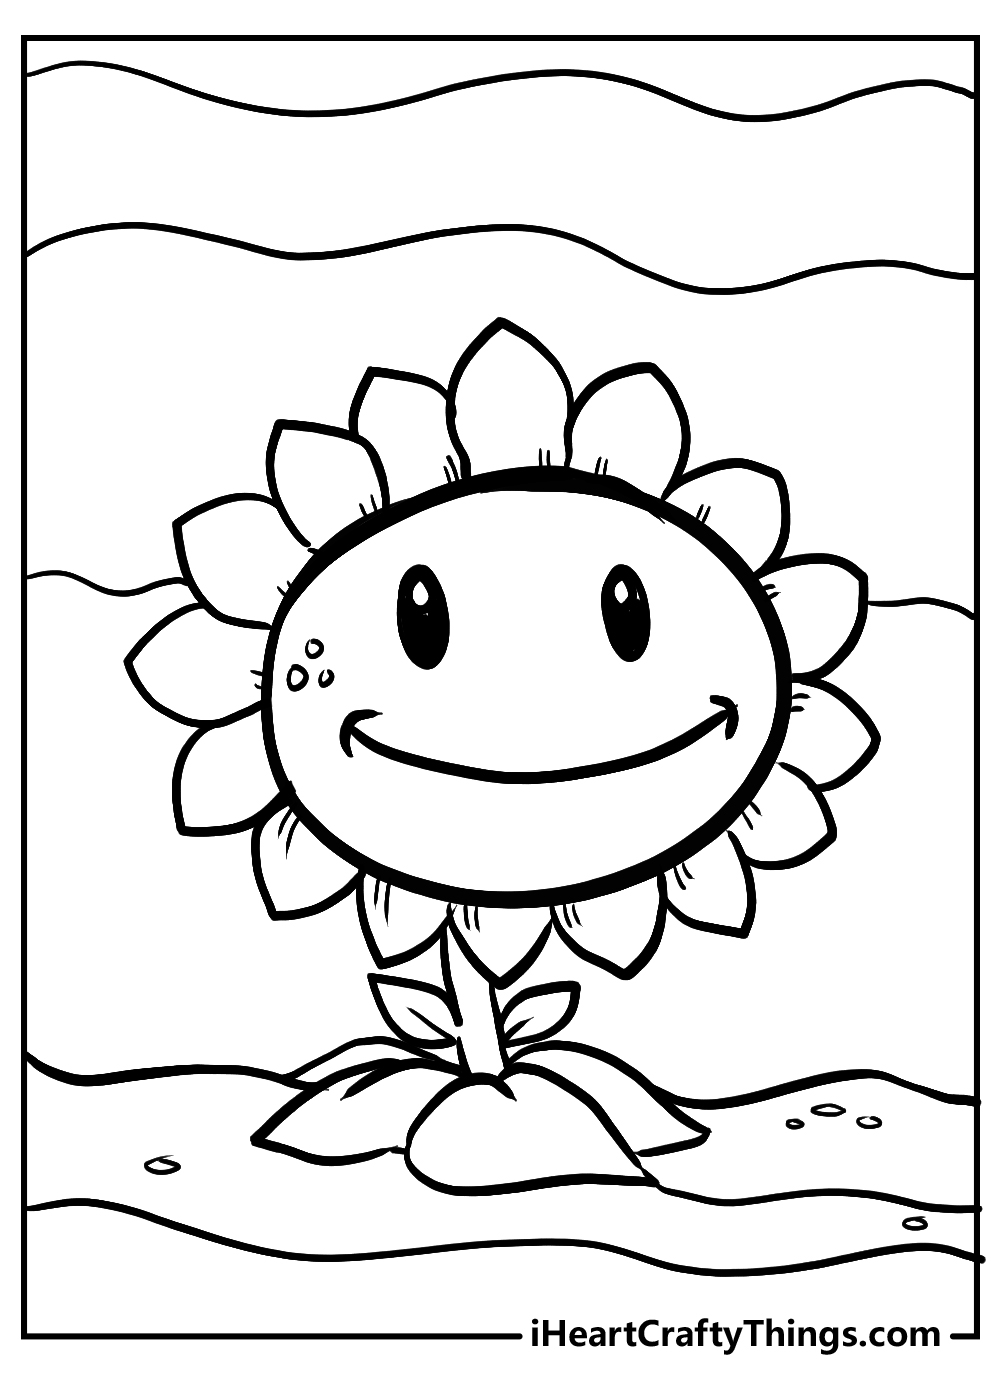 Plants vs. Zombies Coloring Pages